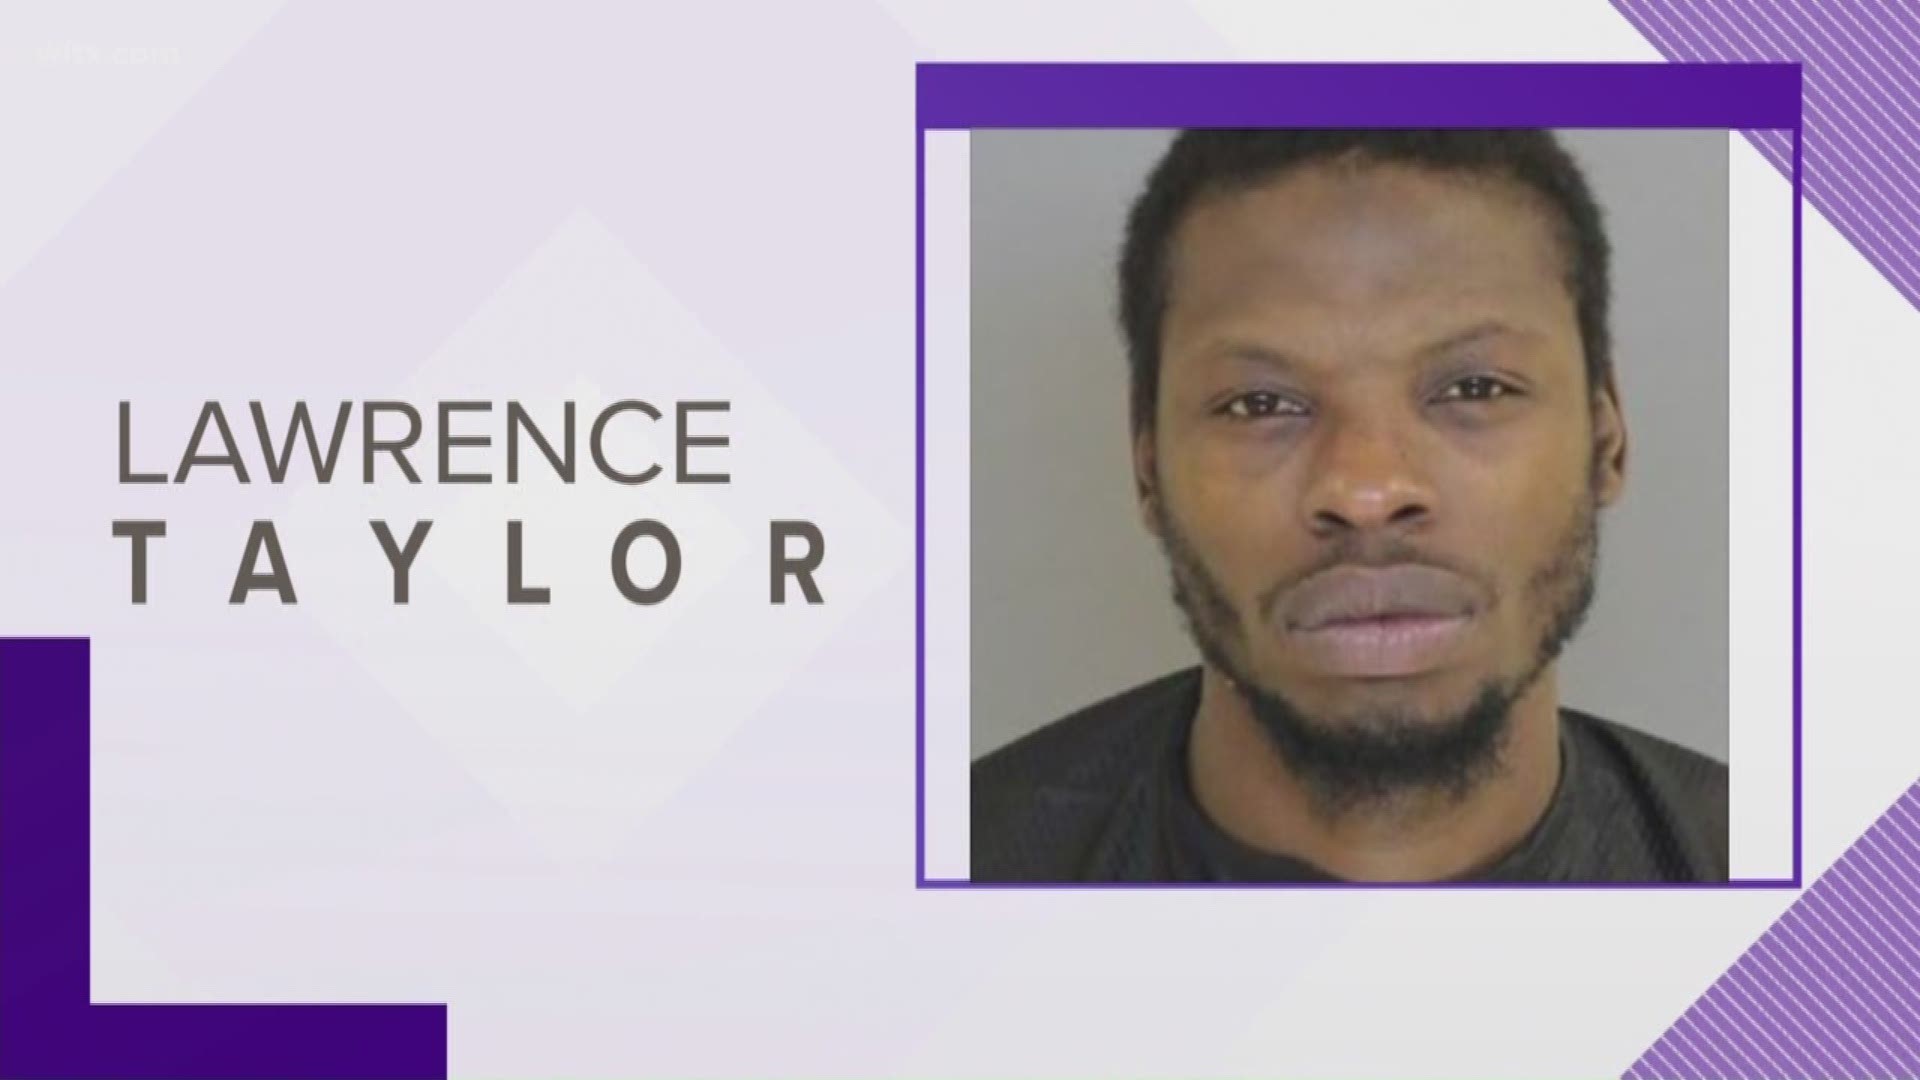 Police say 37-year-old Lawrence Terelle Taylor was involved in a domestic-related incident earlier this month.